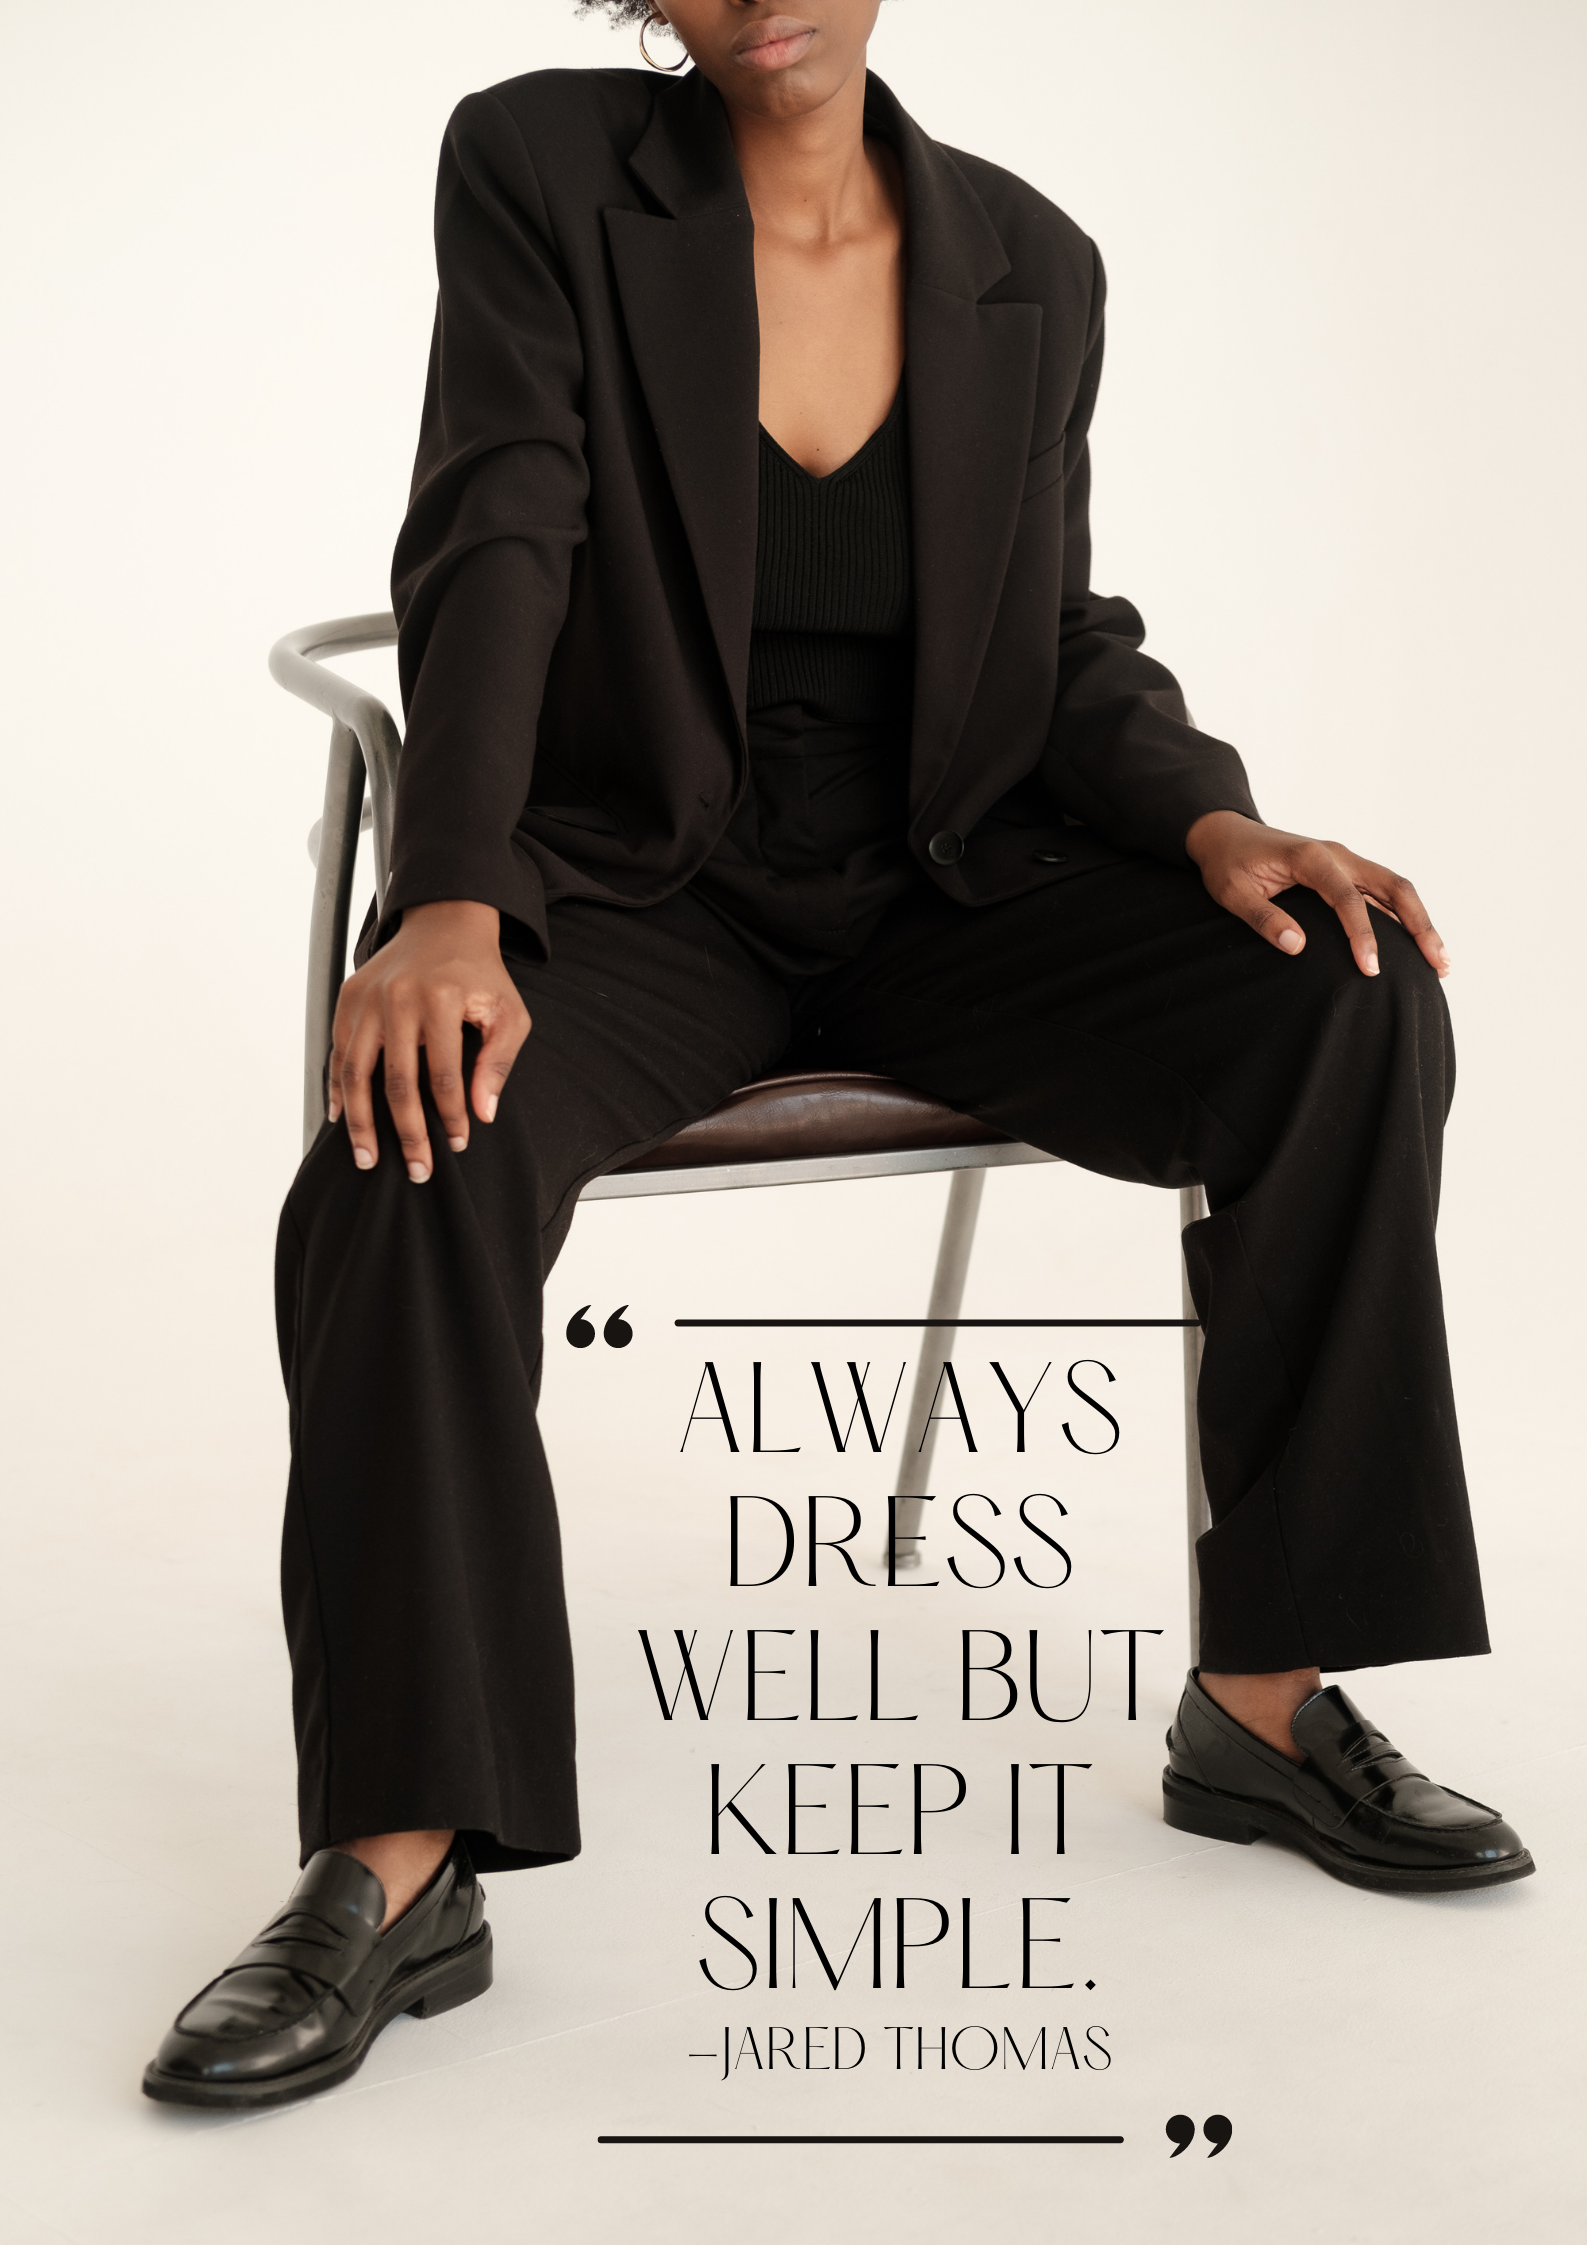 A model poses on a chair, her hands posed on her knees. They're wearing an all-black, gender neutral outfit. Text on the image says, "Always dress well but keep it simple. - Jared Thomas"